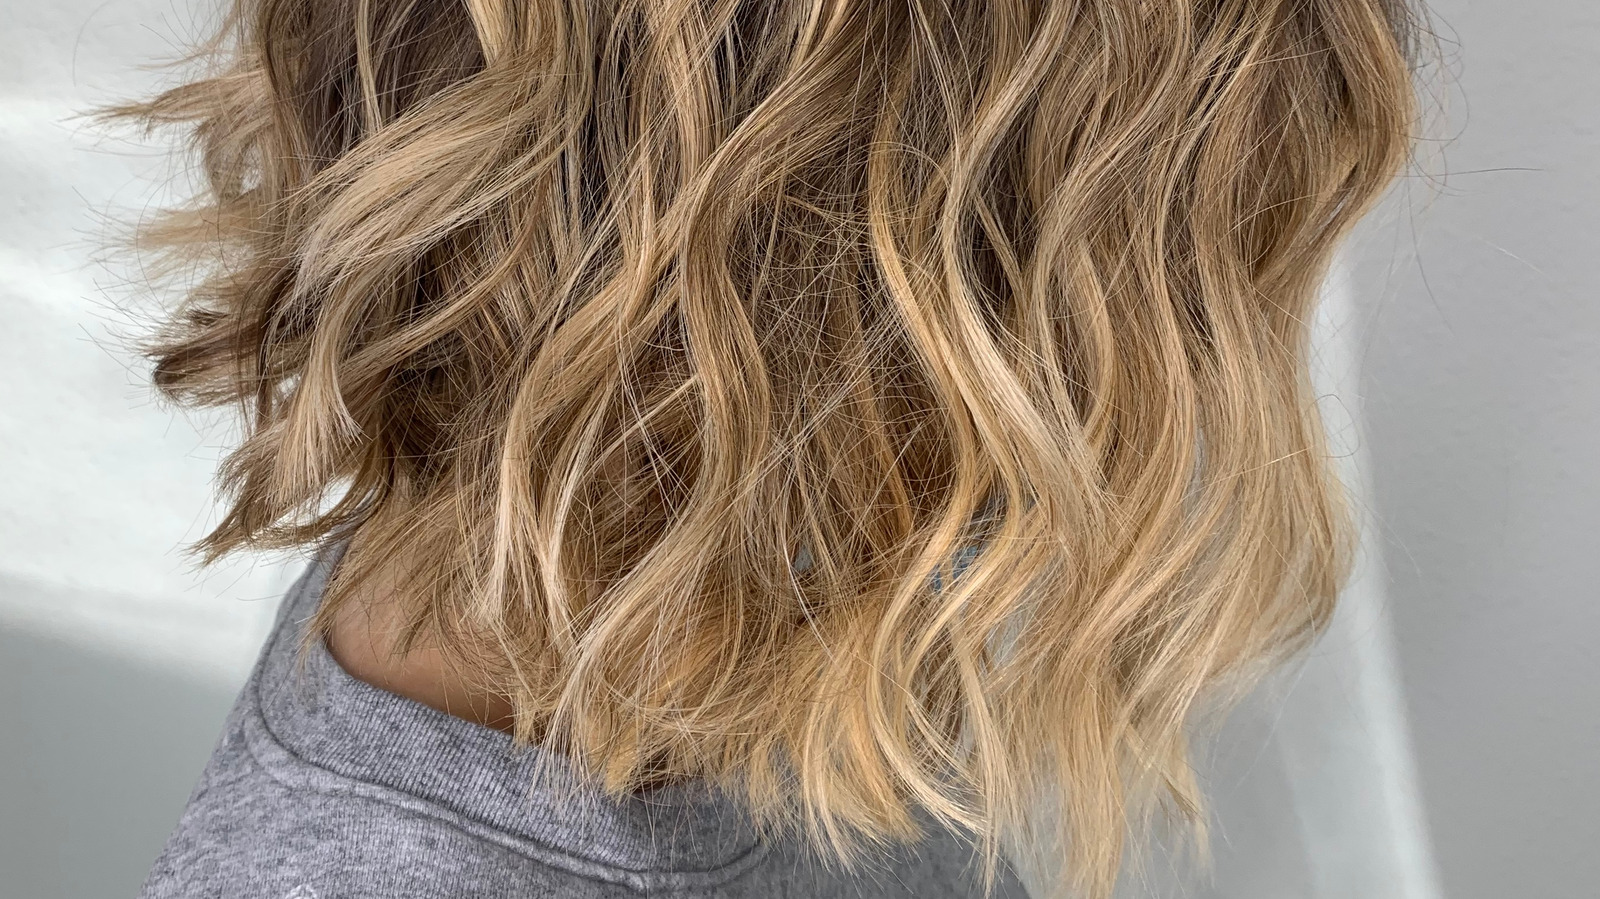 Blonde Hair vs Balayage: What's the Difference? - wide 4